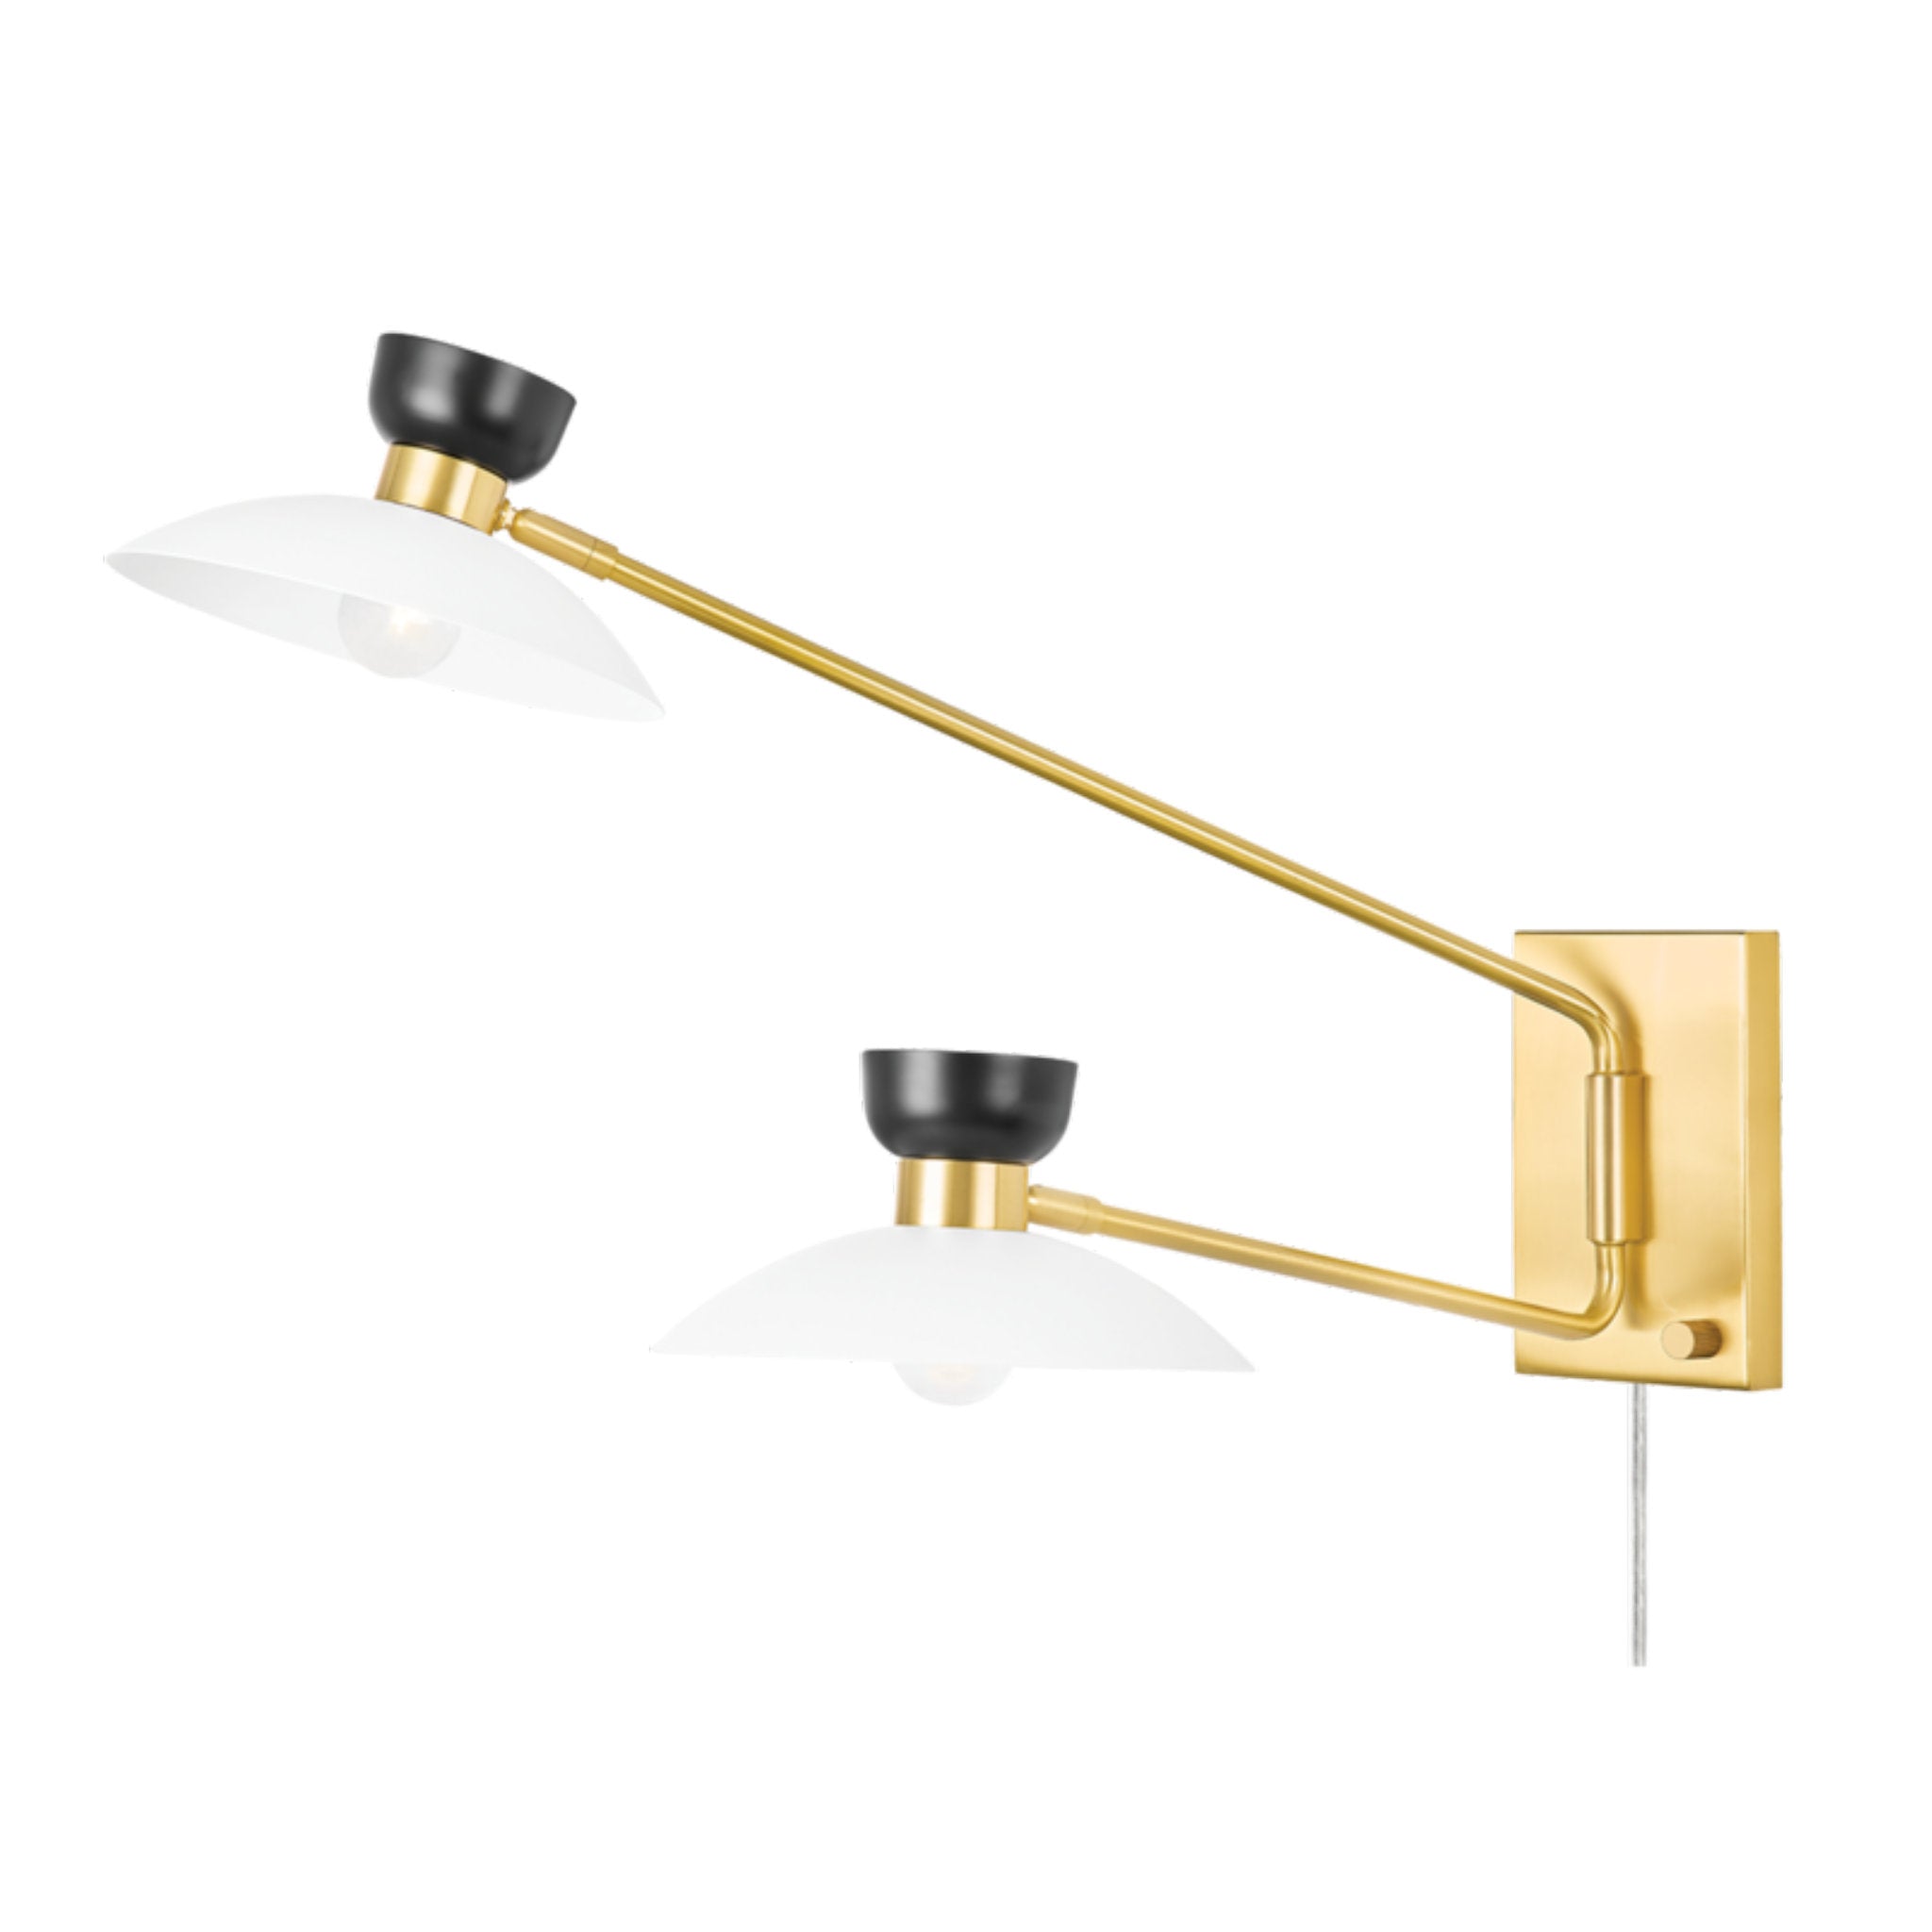 Whitley 2 Light Plug-in Sconce in Aged Brass